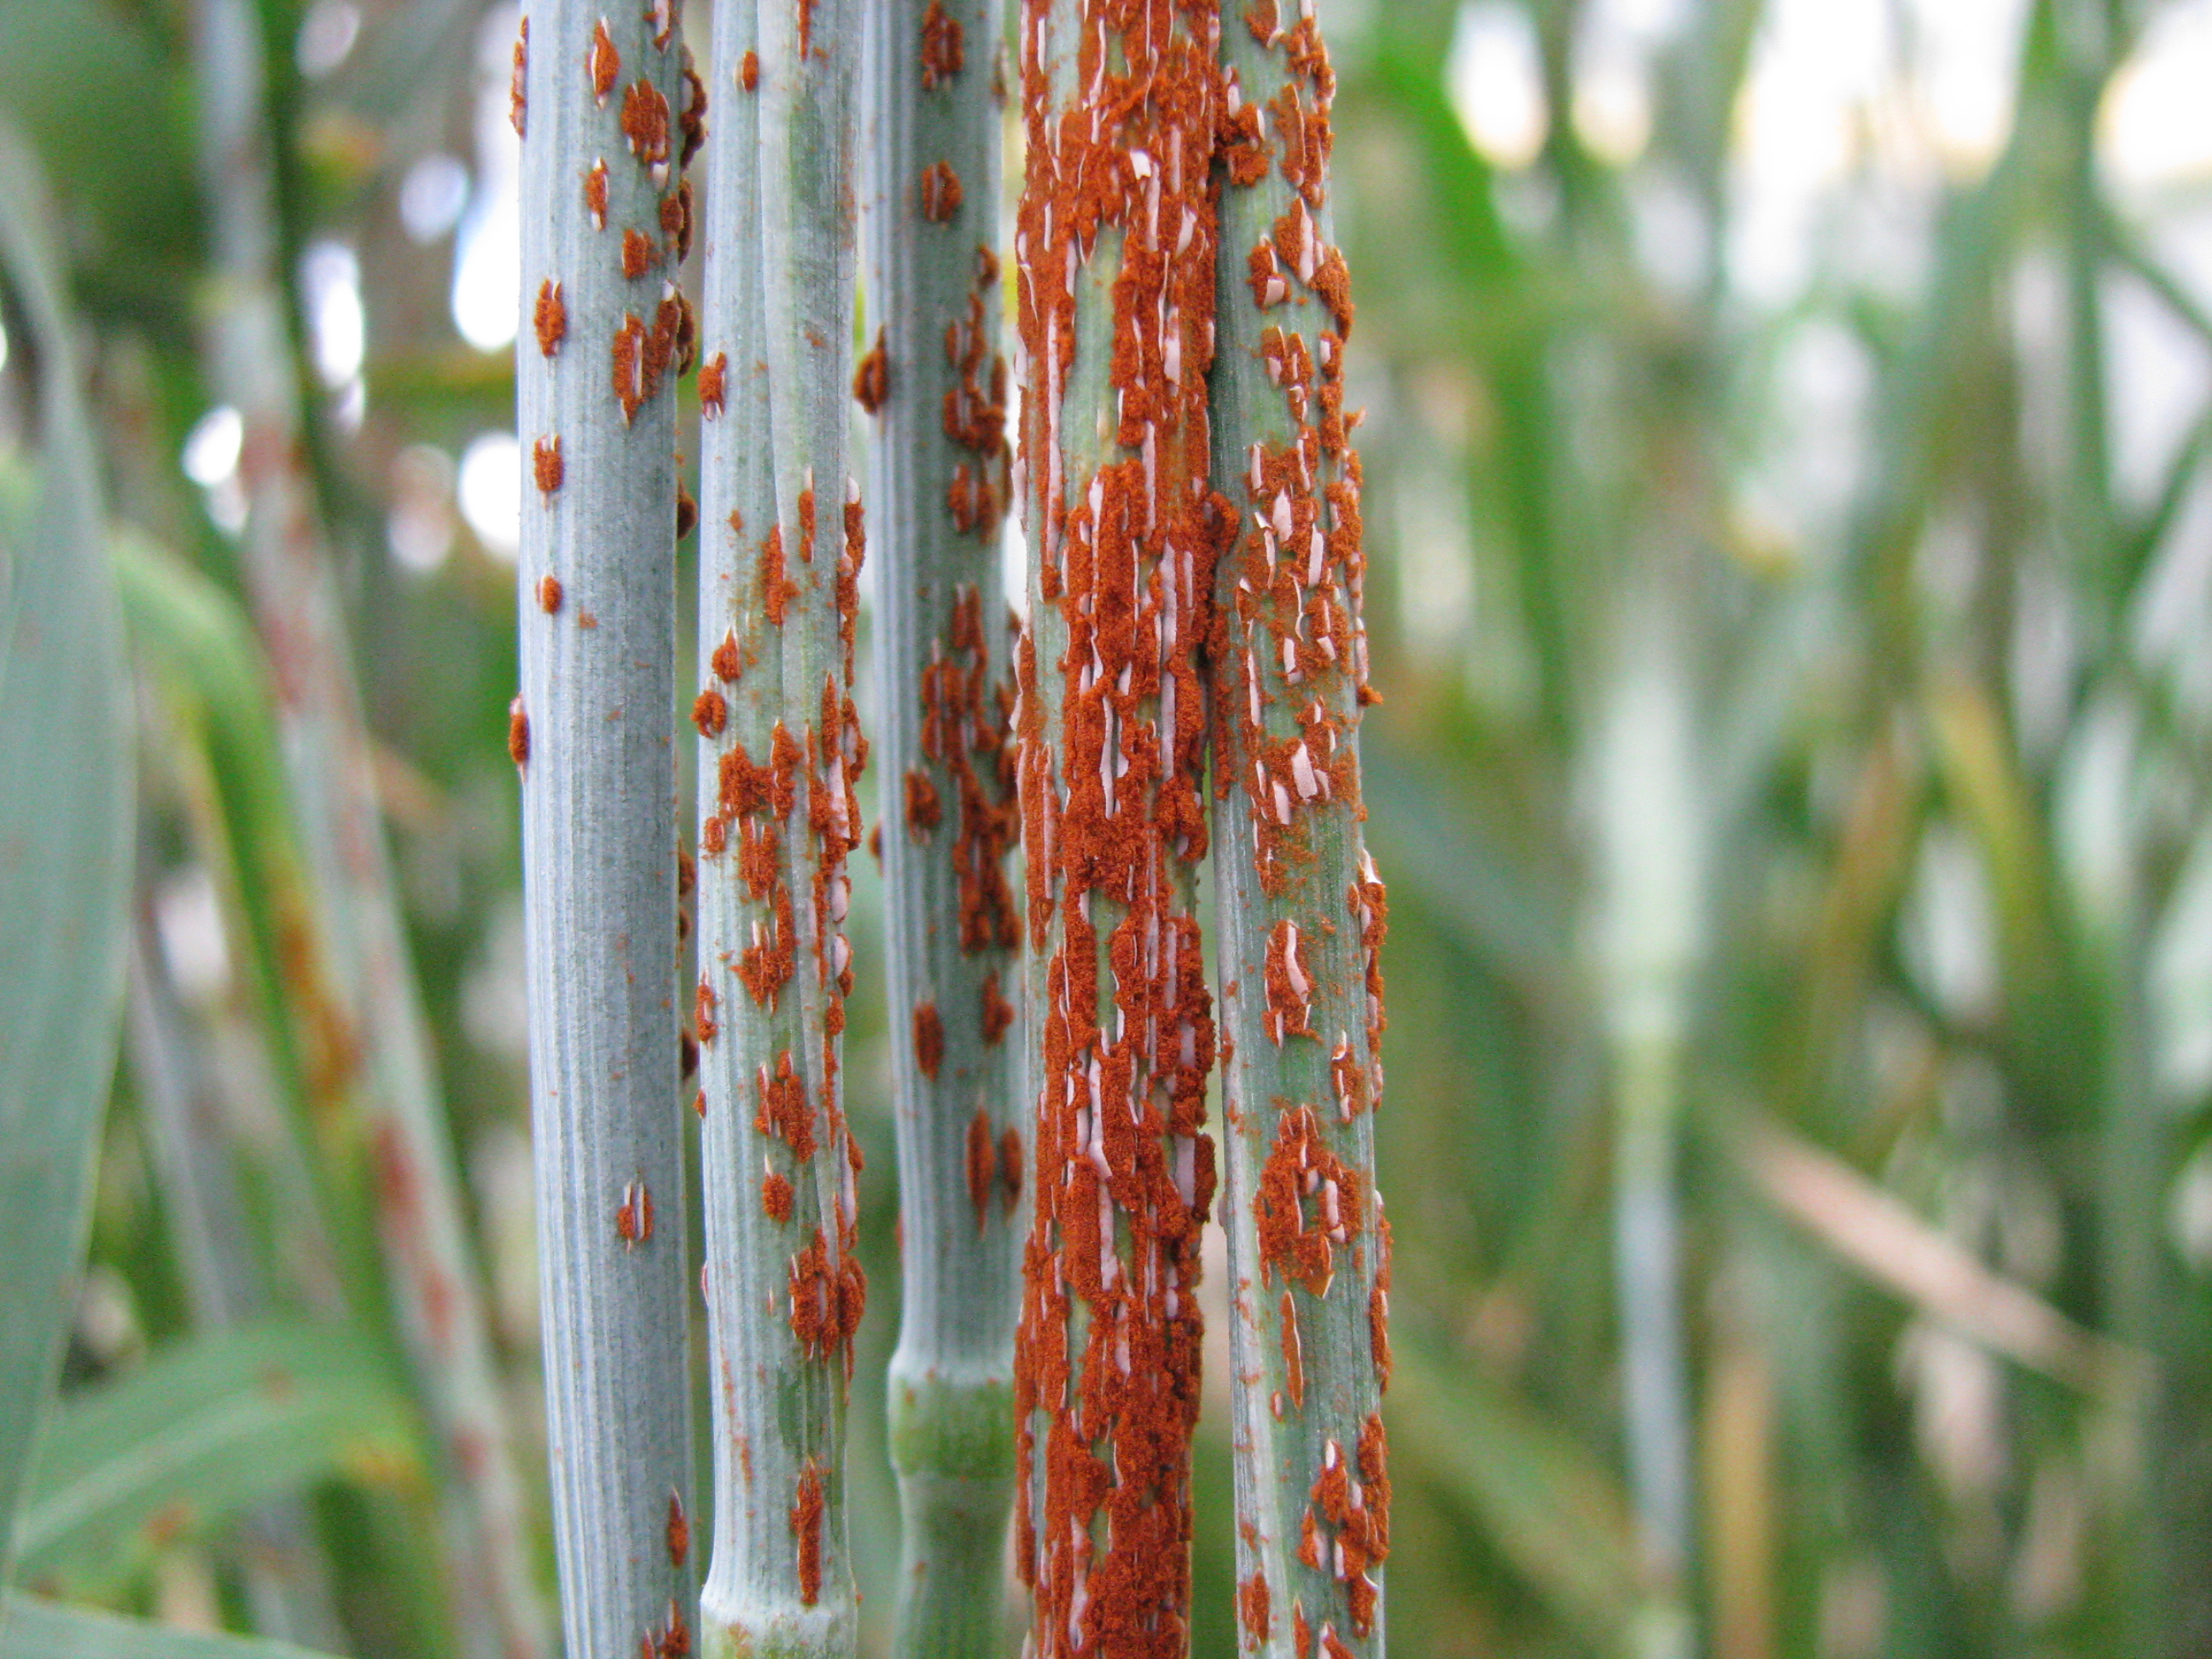 green stems of a cereal plant covered in orange rust fungus